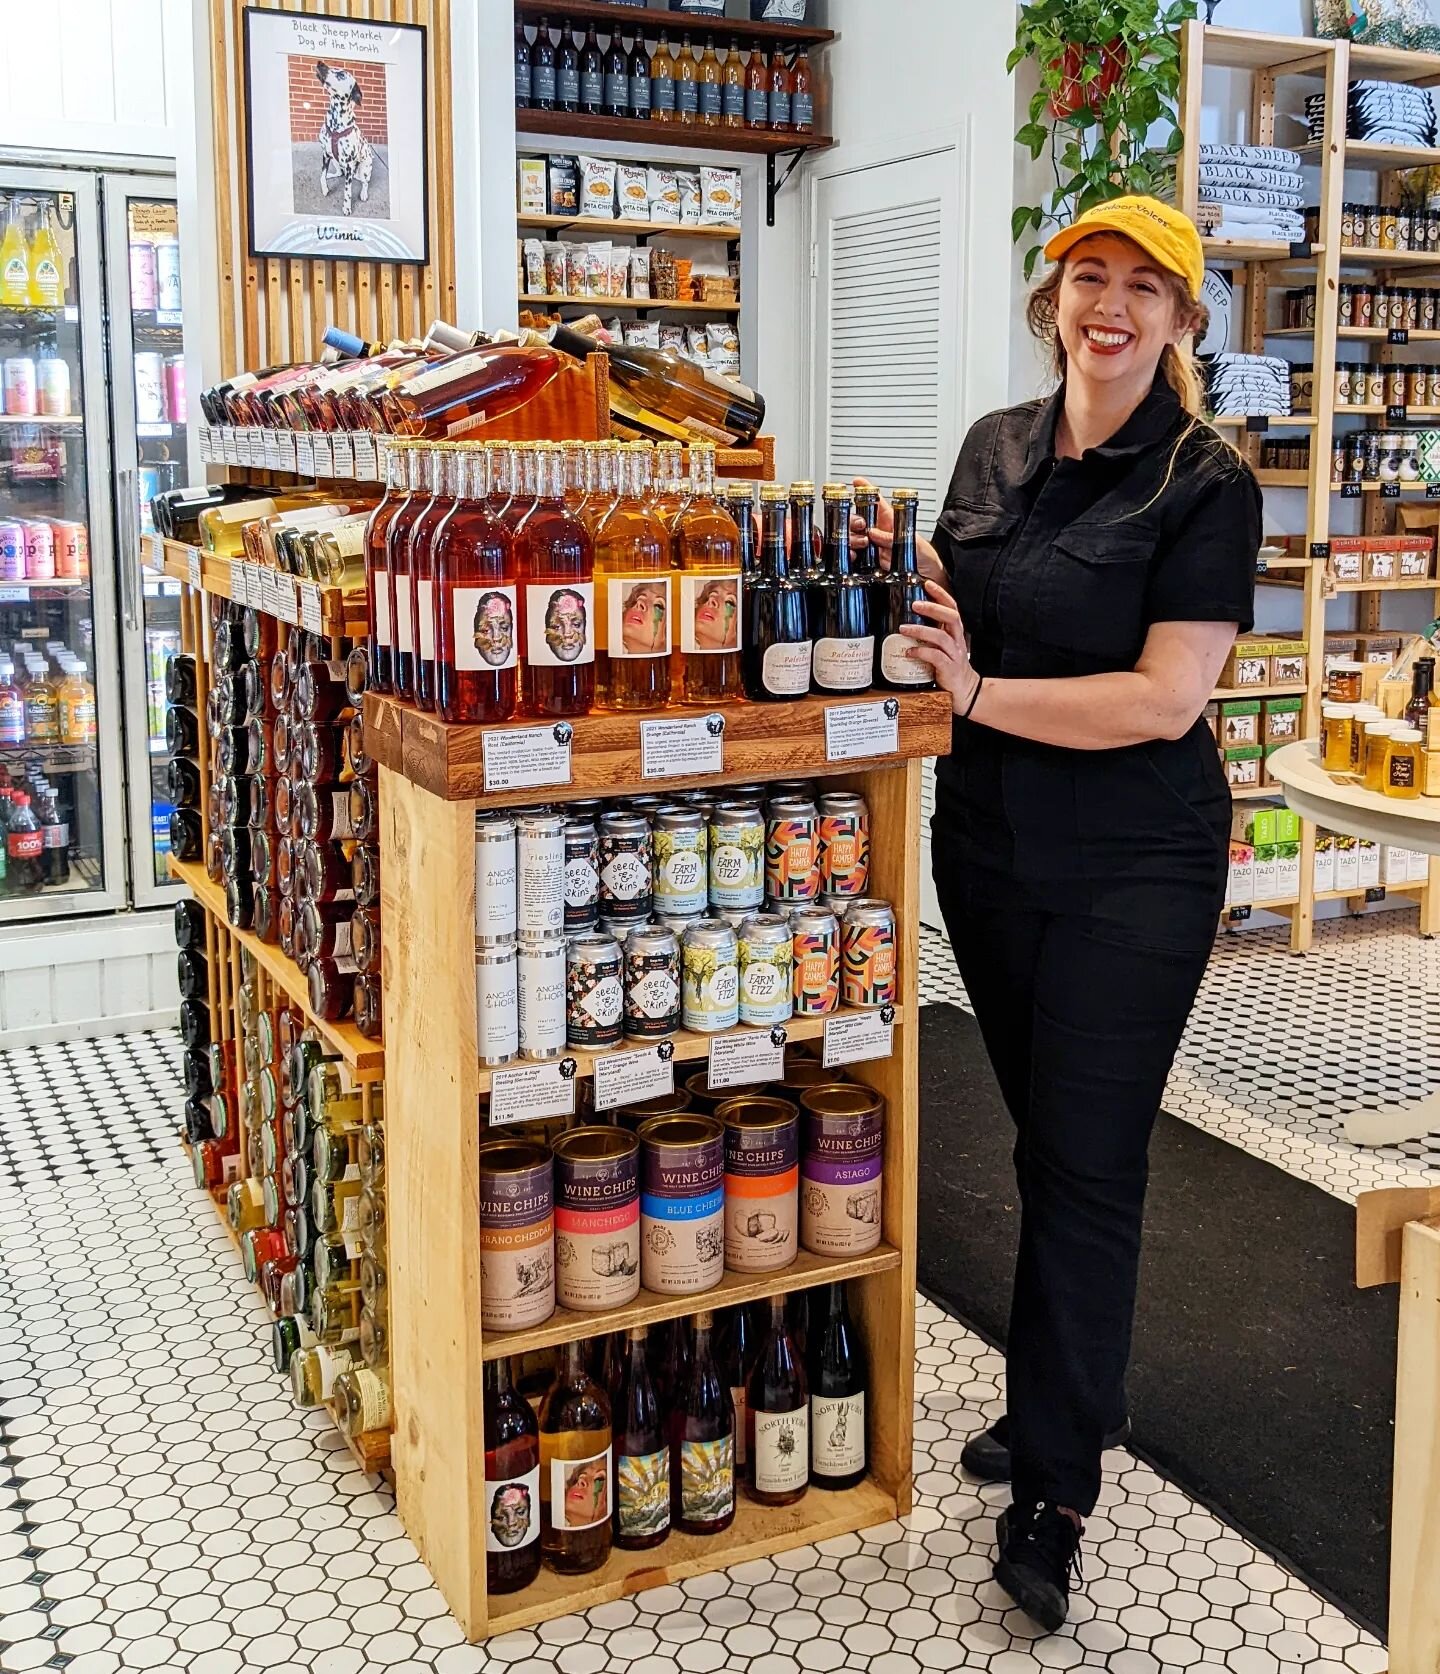 In case you hadn't heard, we are OFFICIALLY selling wine and beer at the market! The whole selection is carefully curated by our very own program director Julia, and we have to say she did a phenomenal job. Thank you to Julia for your incredible work